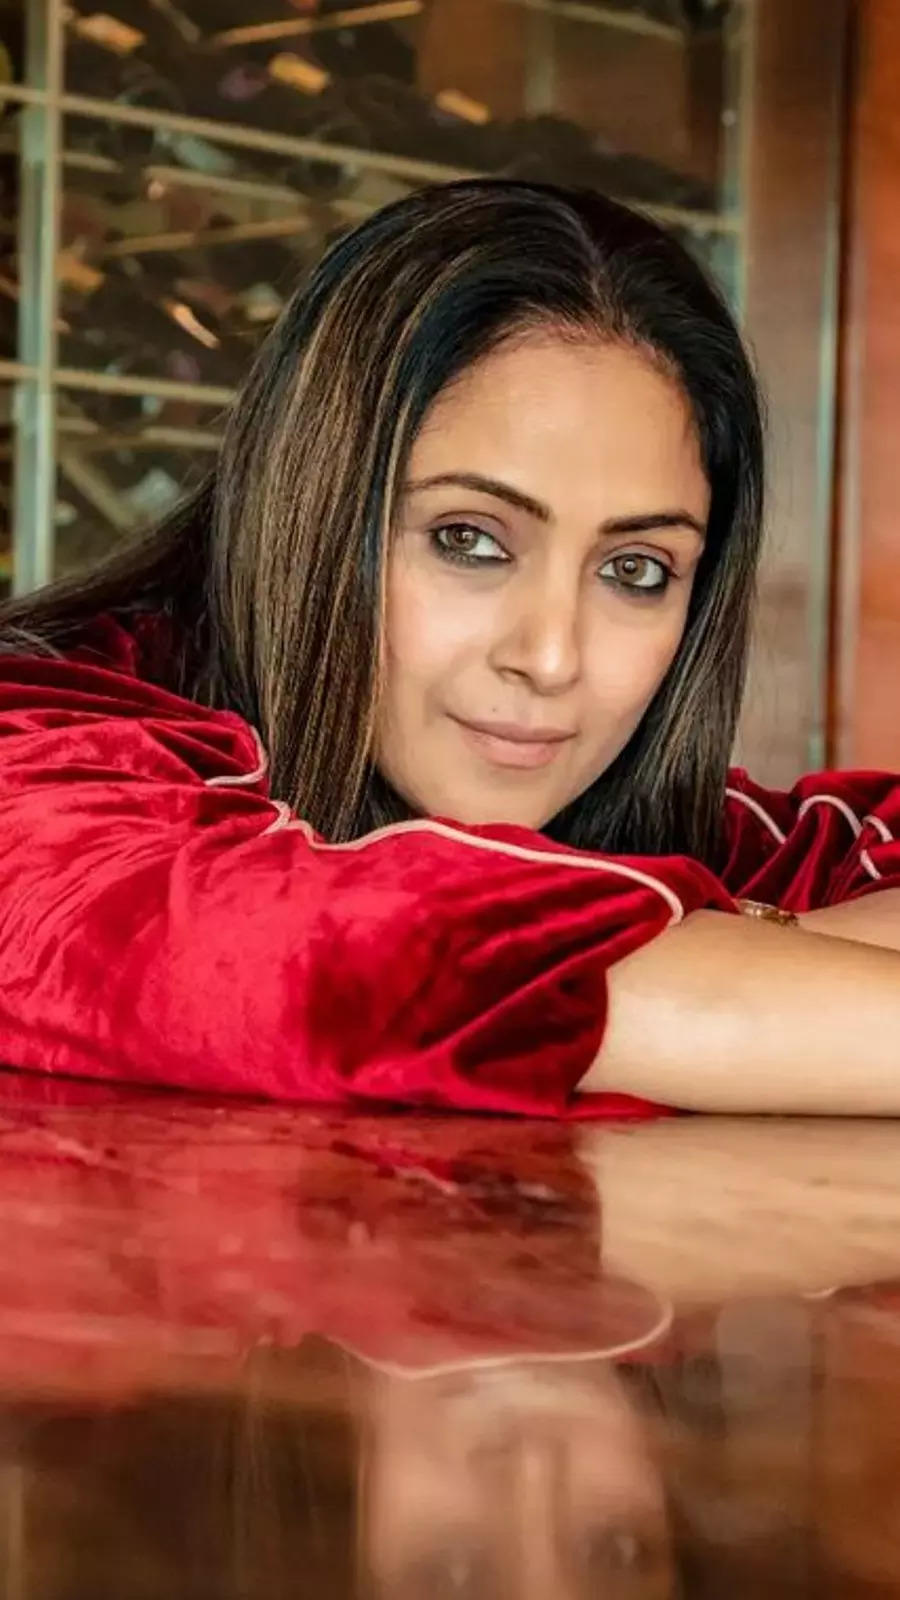 10 pictures prove why Simran is a vintage queen | Times of India